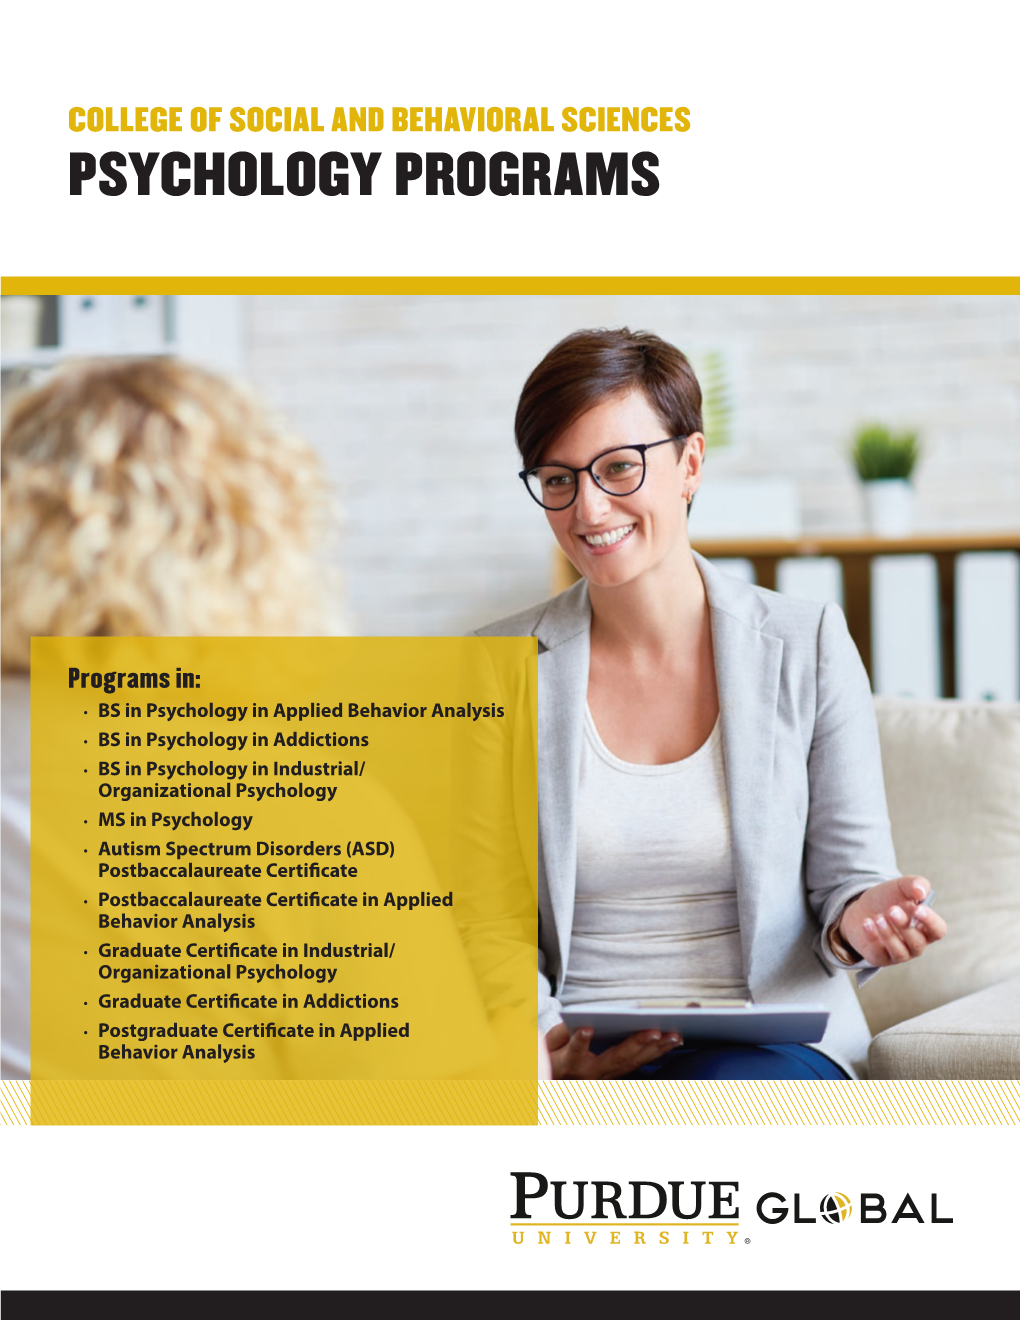 College of Social and Behavioral Sciences Psychology Programs